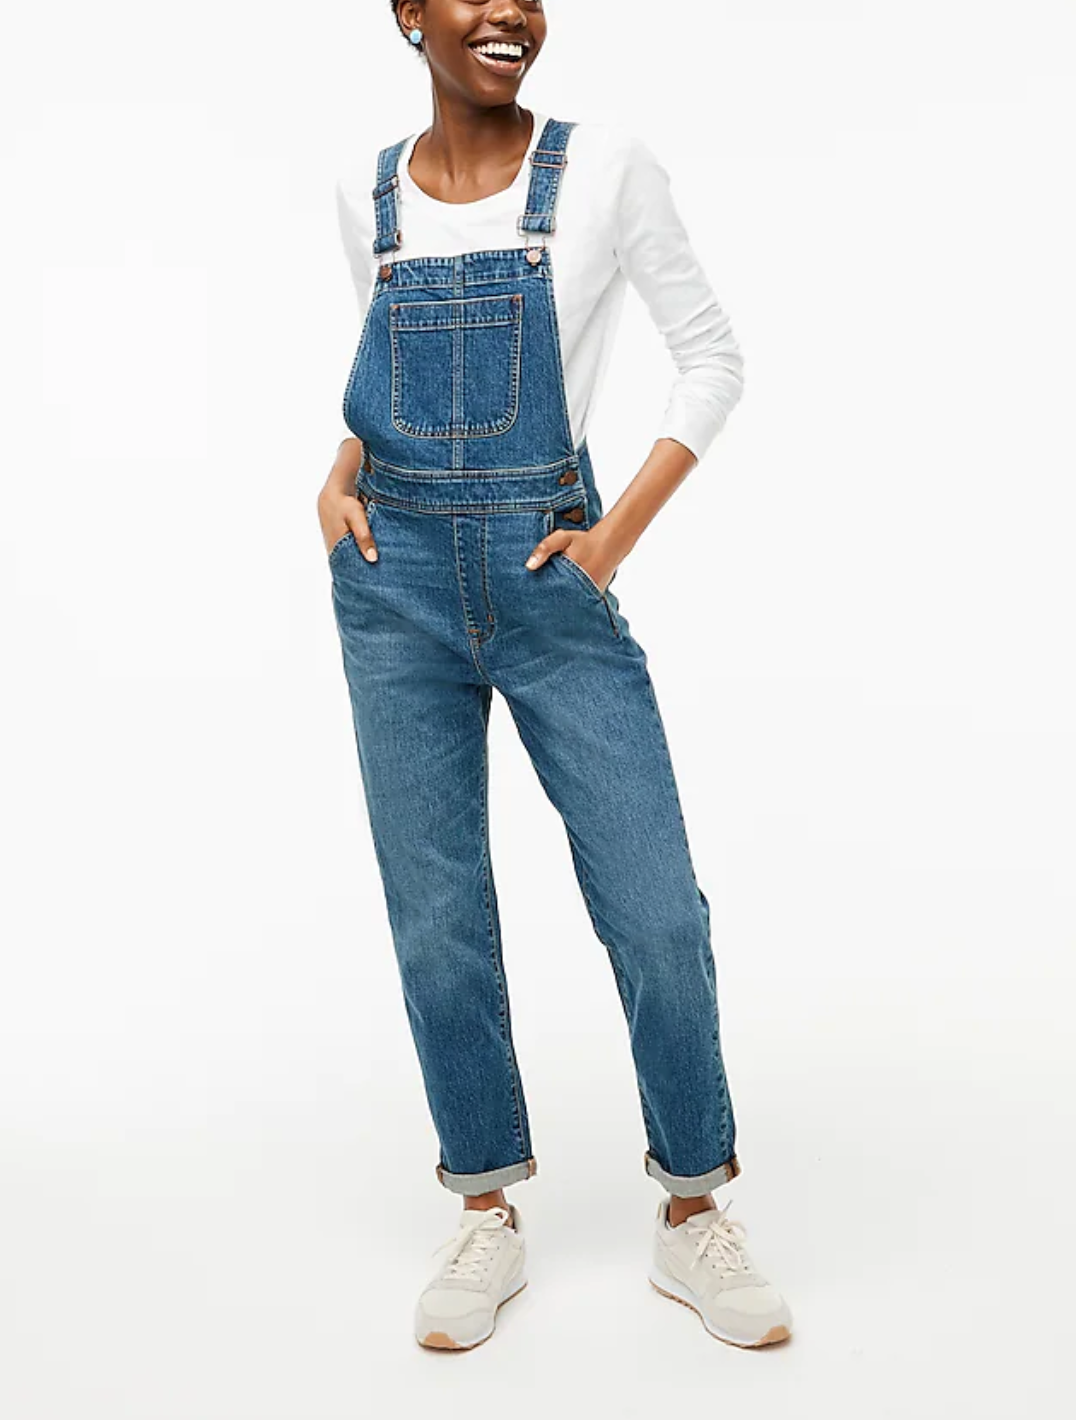 Classic Overalls in All-Day Stretch